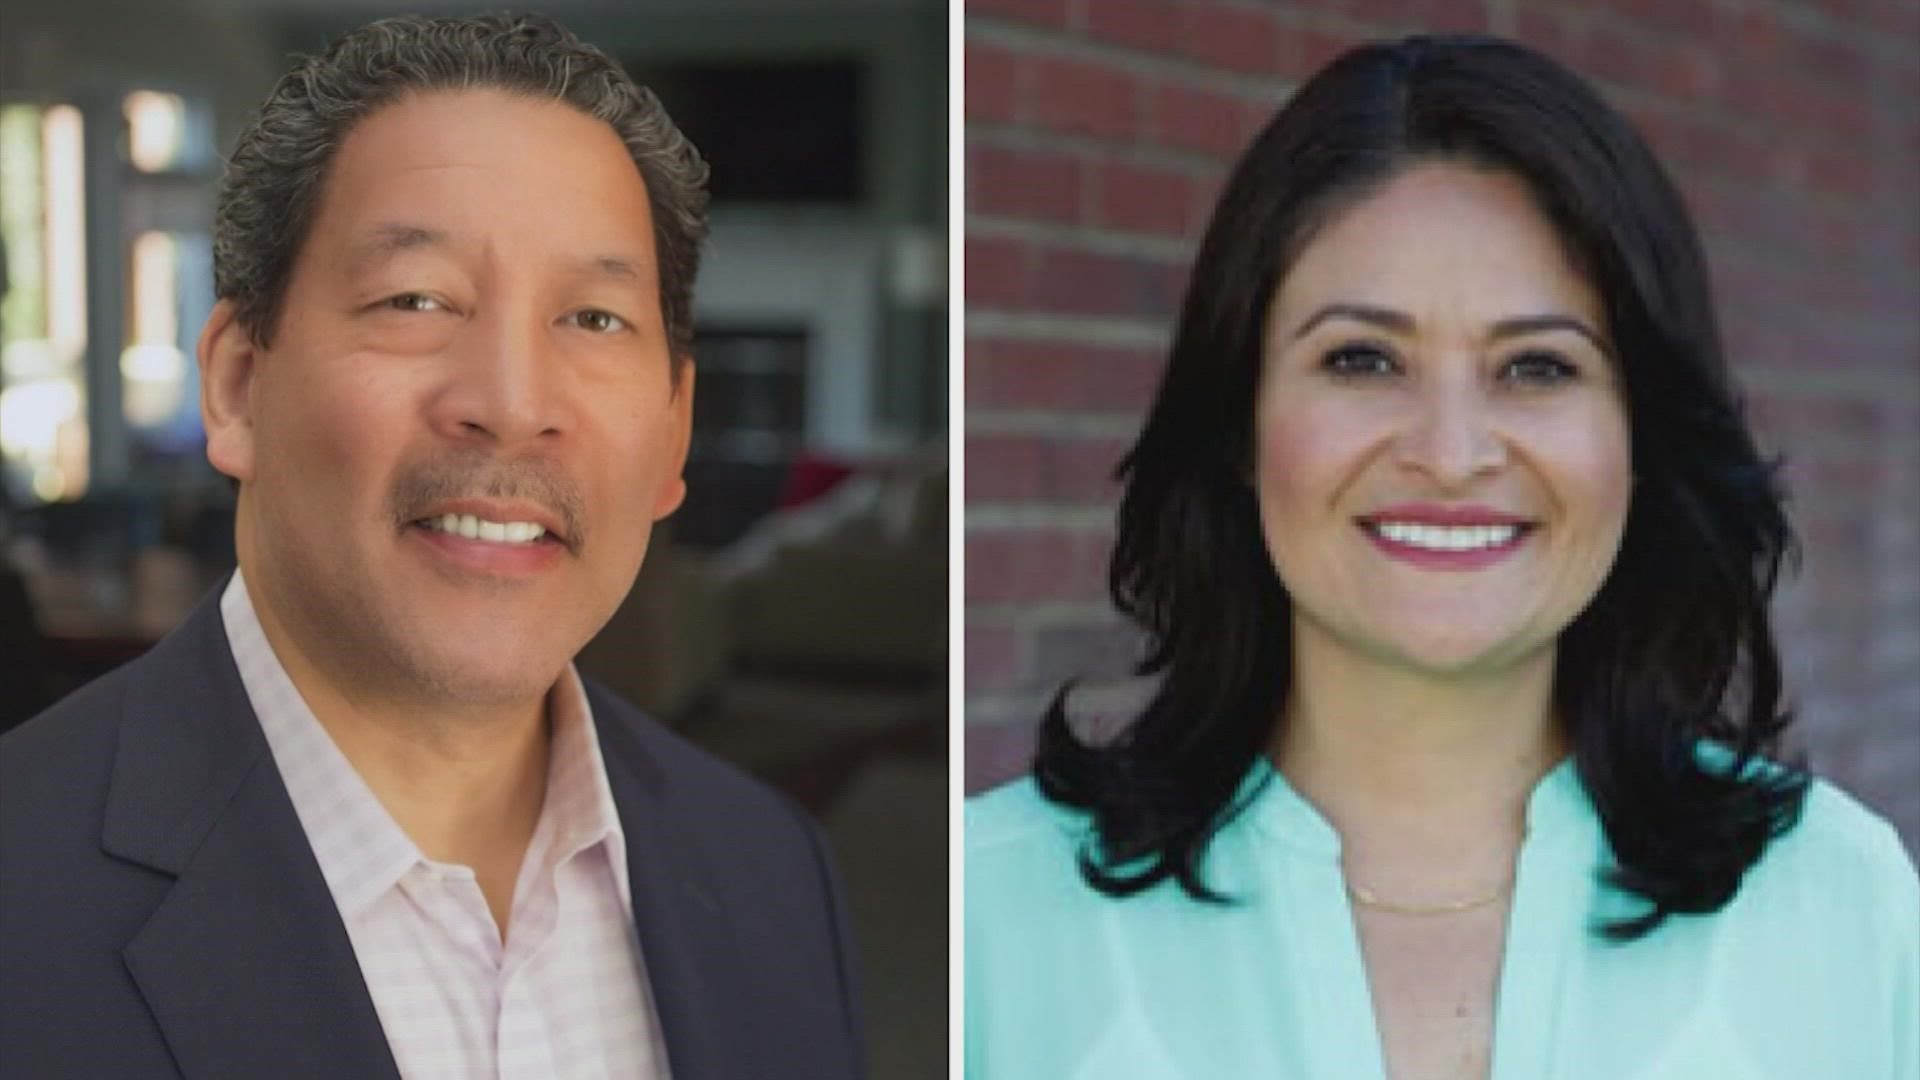 González and Harrell are vying for the open seat vacated by Seattle Mayor Jenny Durkan, who chose not to run for re-election.